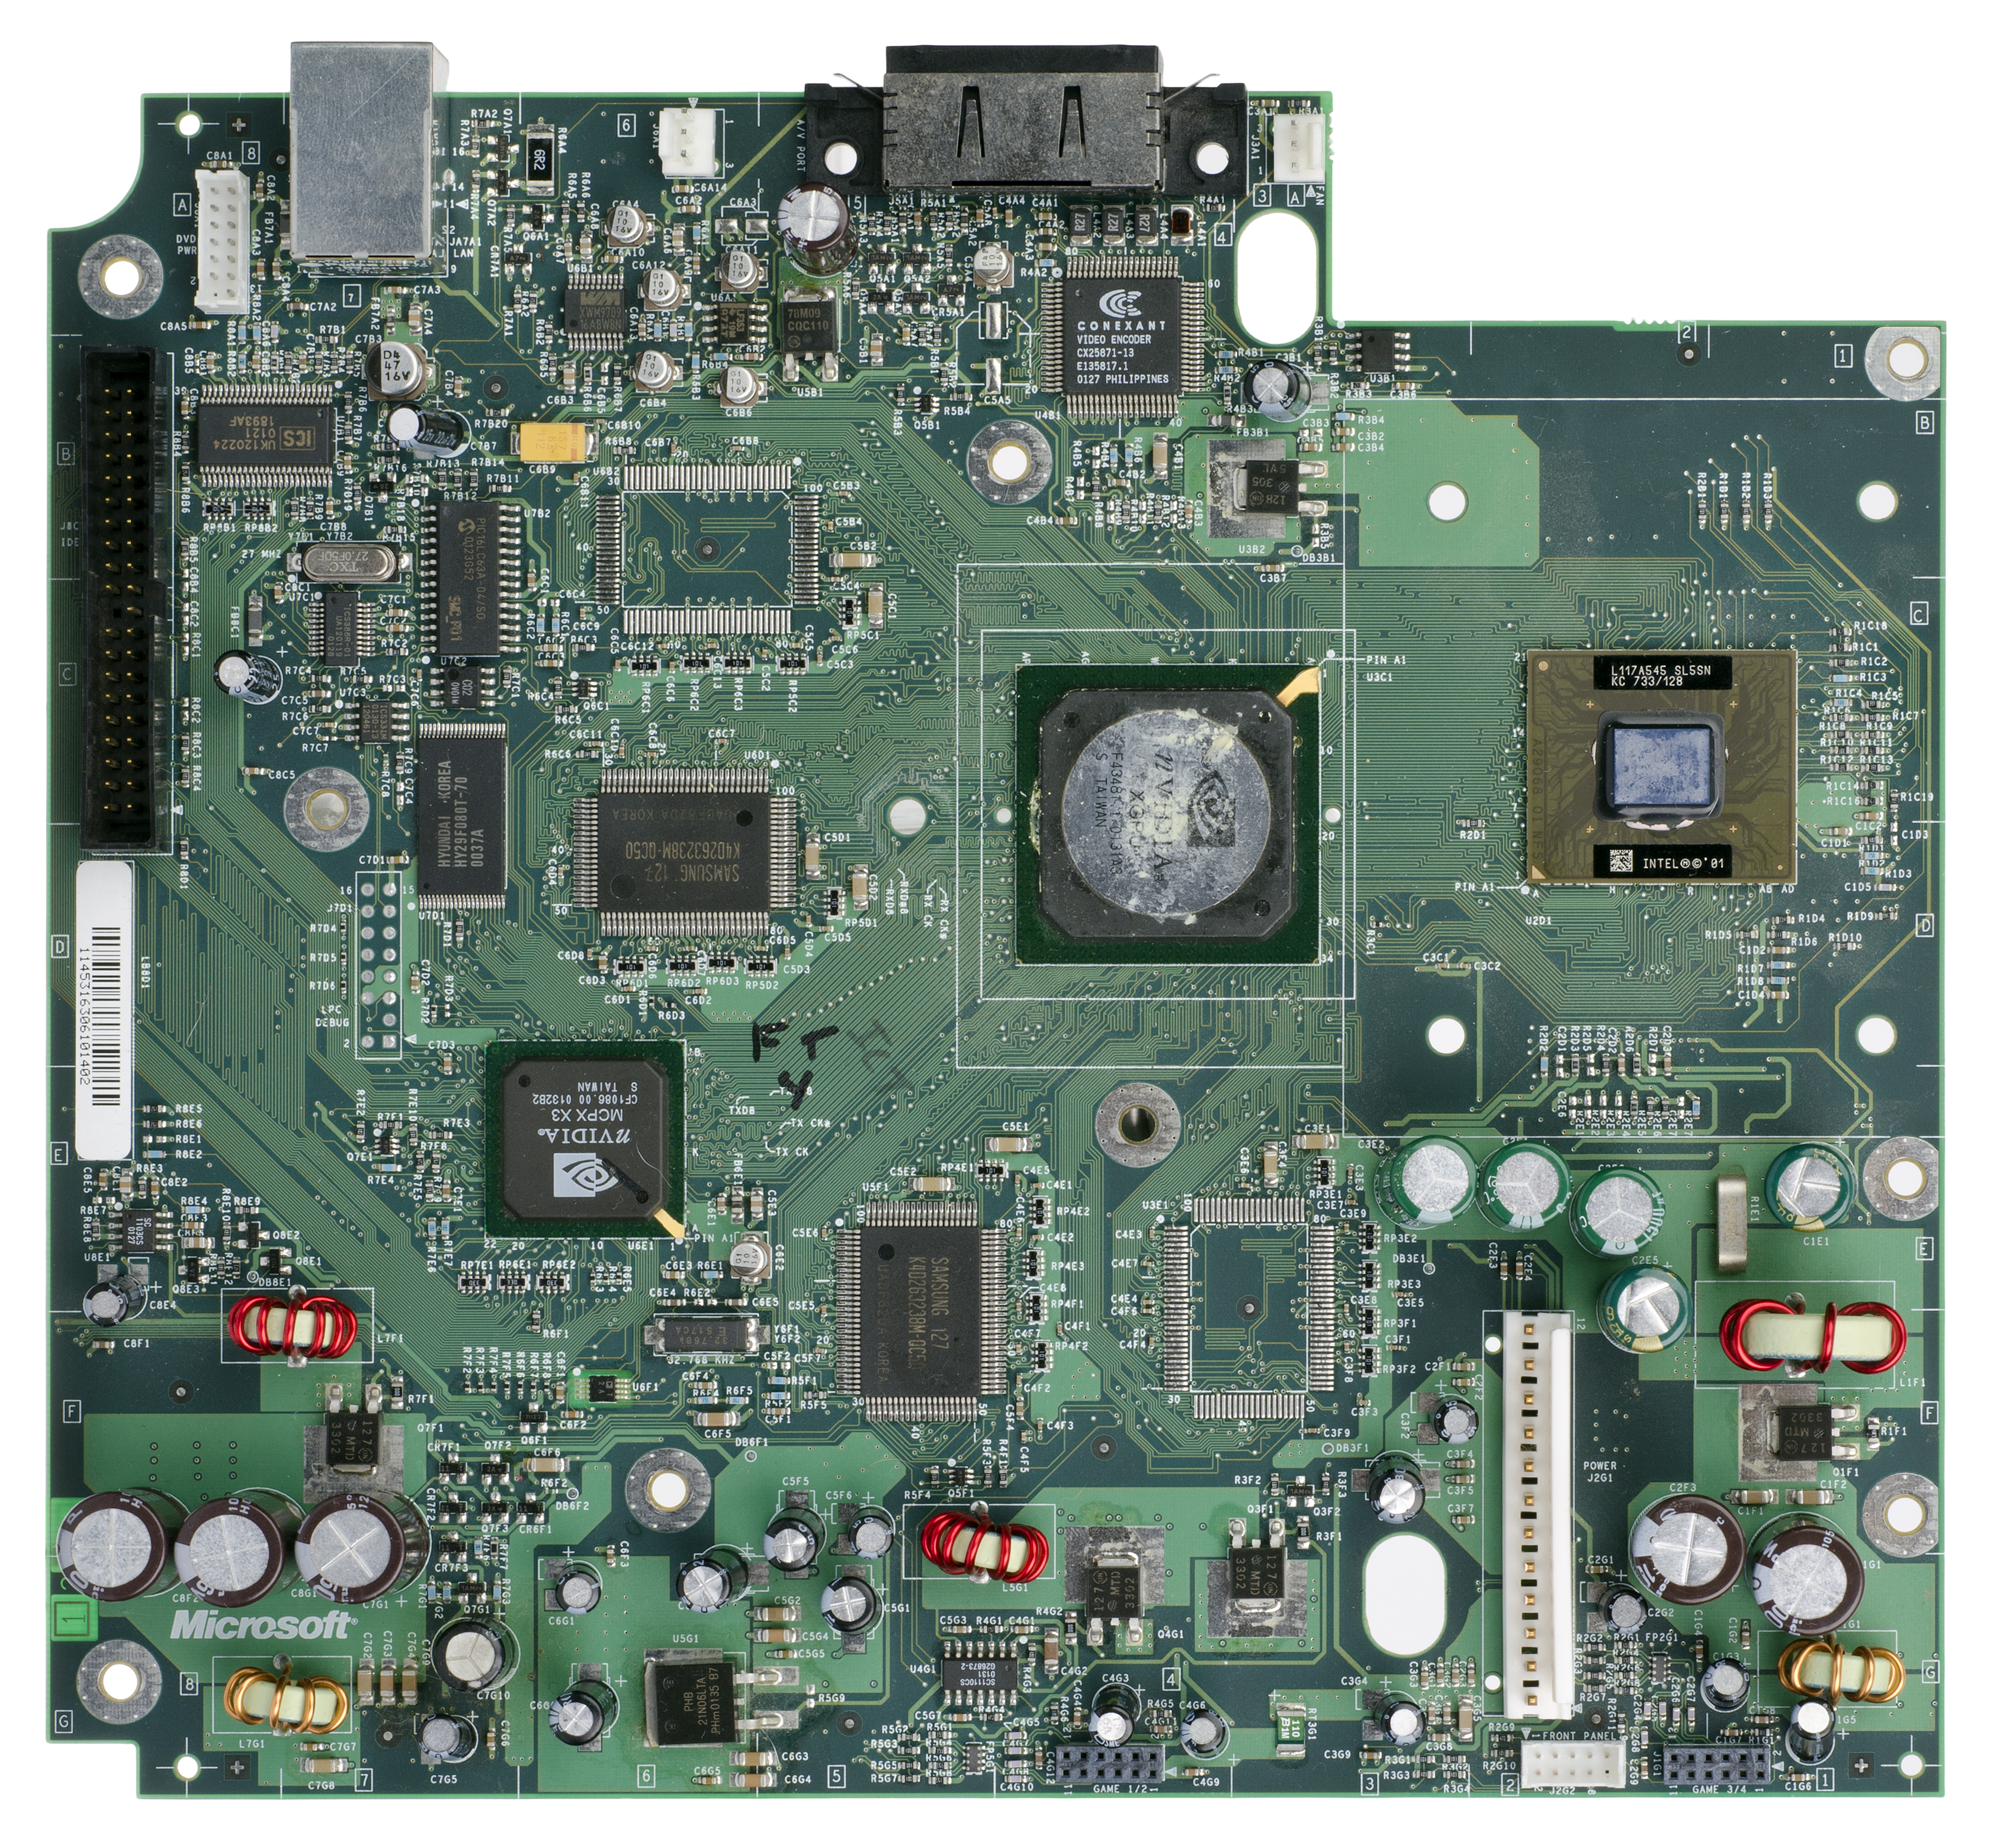 Source: https://gamingdoc.org/repairs/consoles/microsoft-x-box/components/motherboard/version-1-0-1-1/